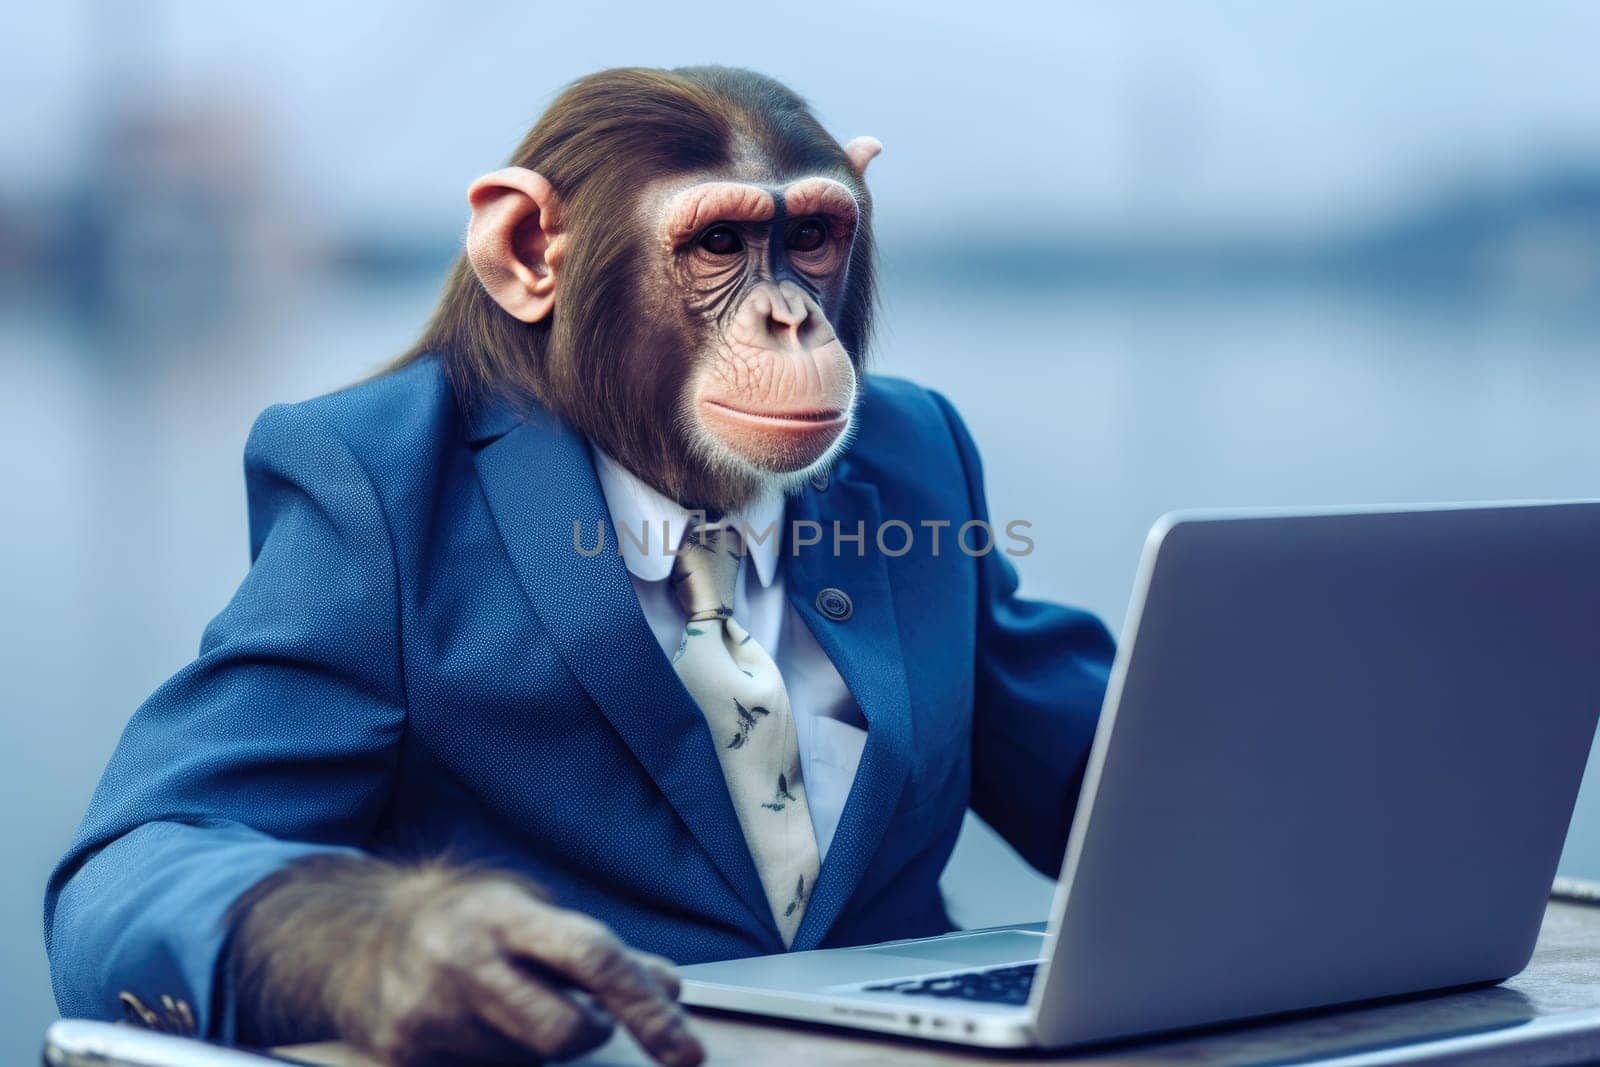 Monkey in a business suit with a laptop. Concept of successful education by andreyz